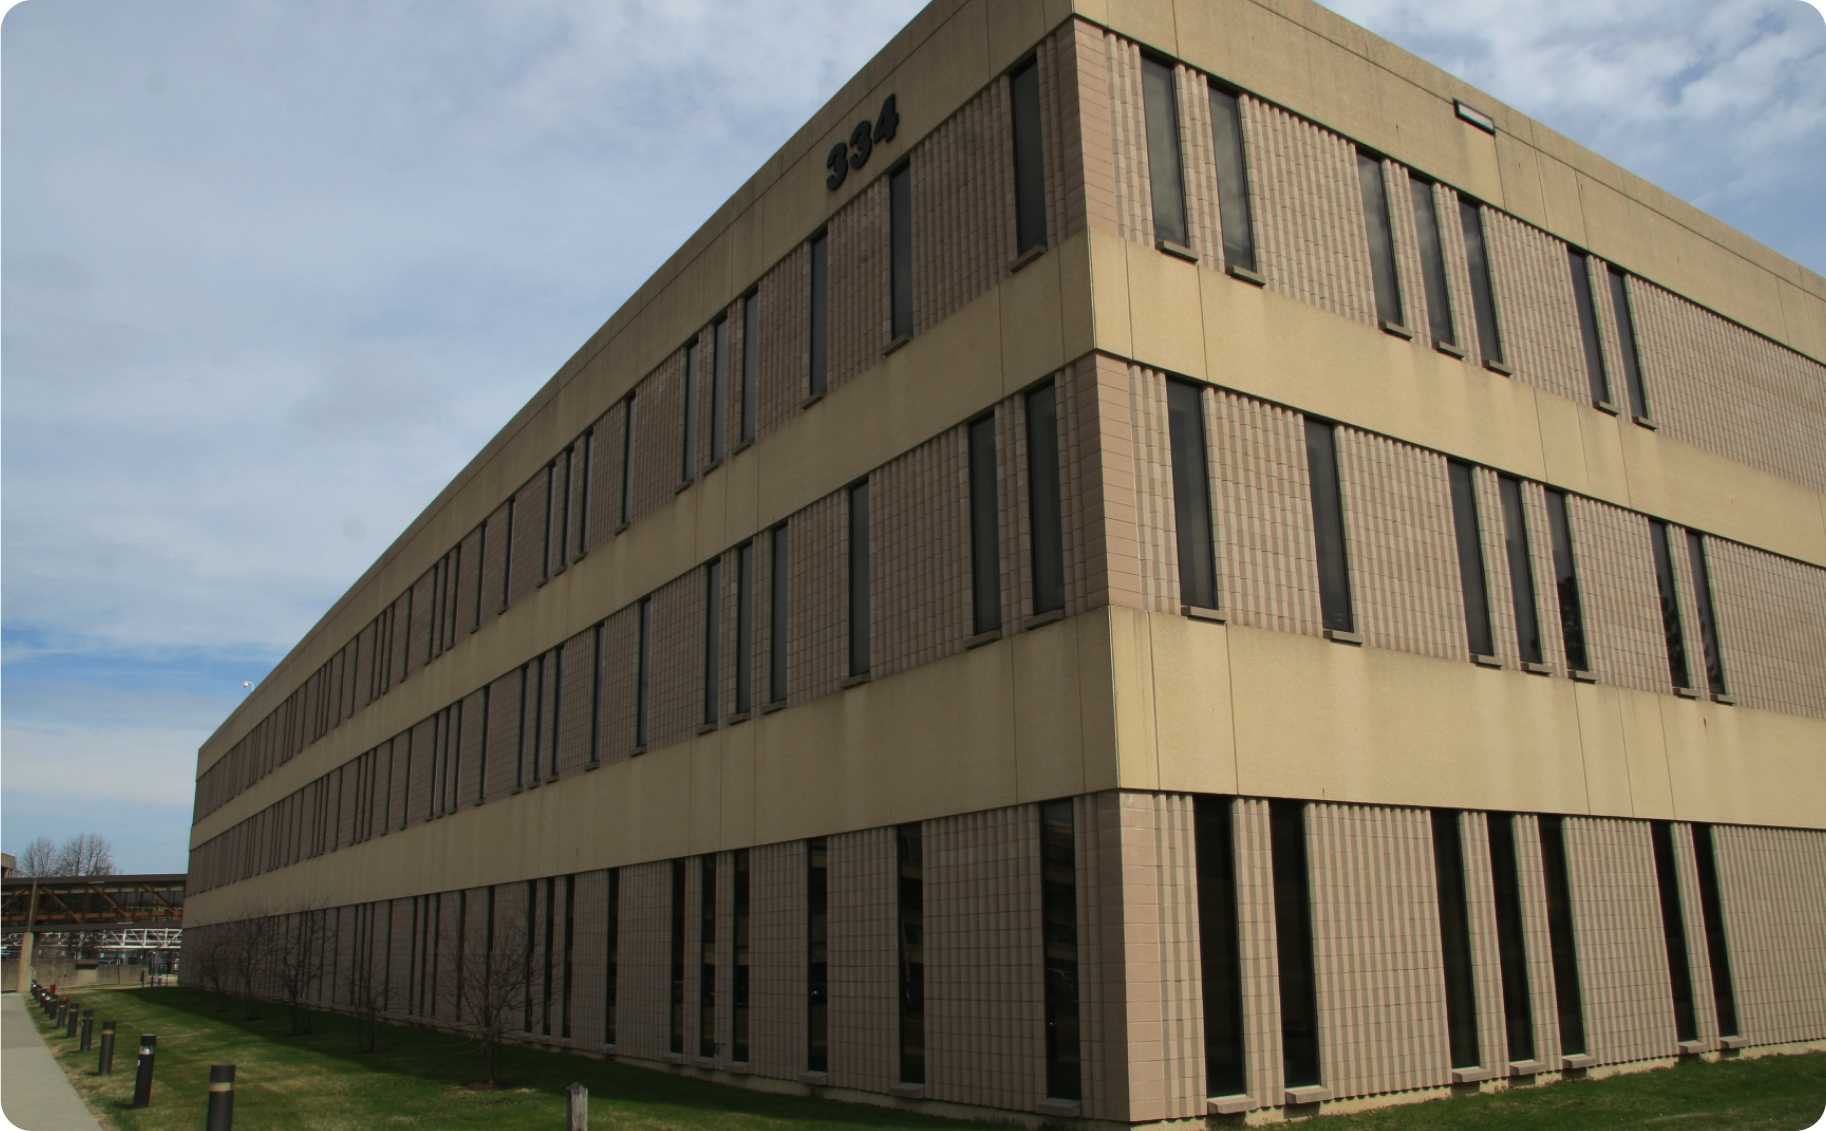 one of the hvff manufacturing buildings